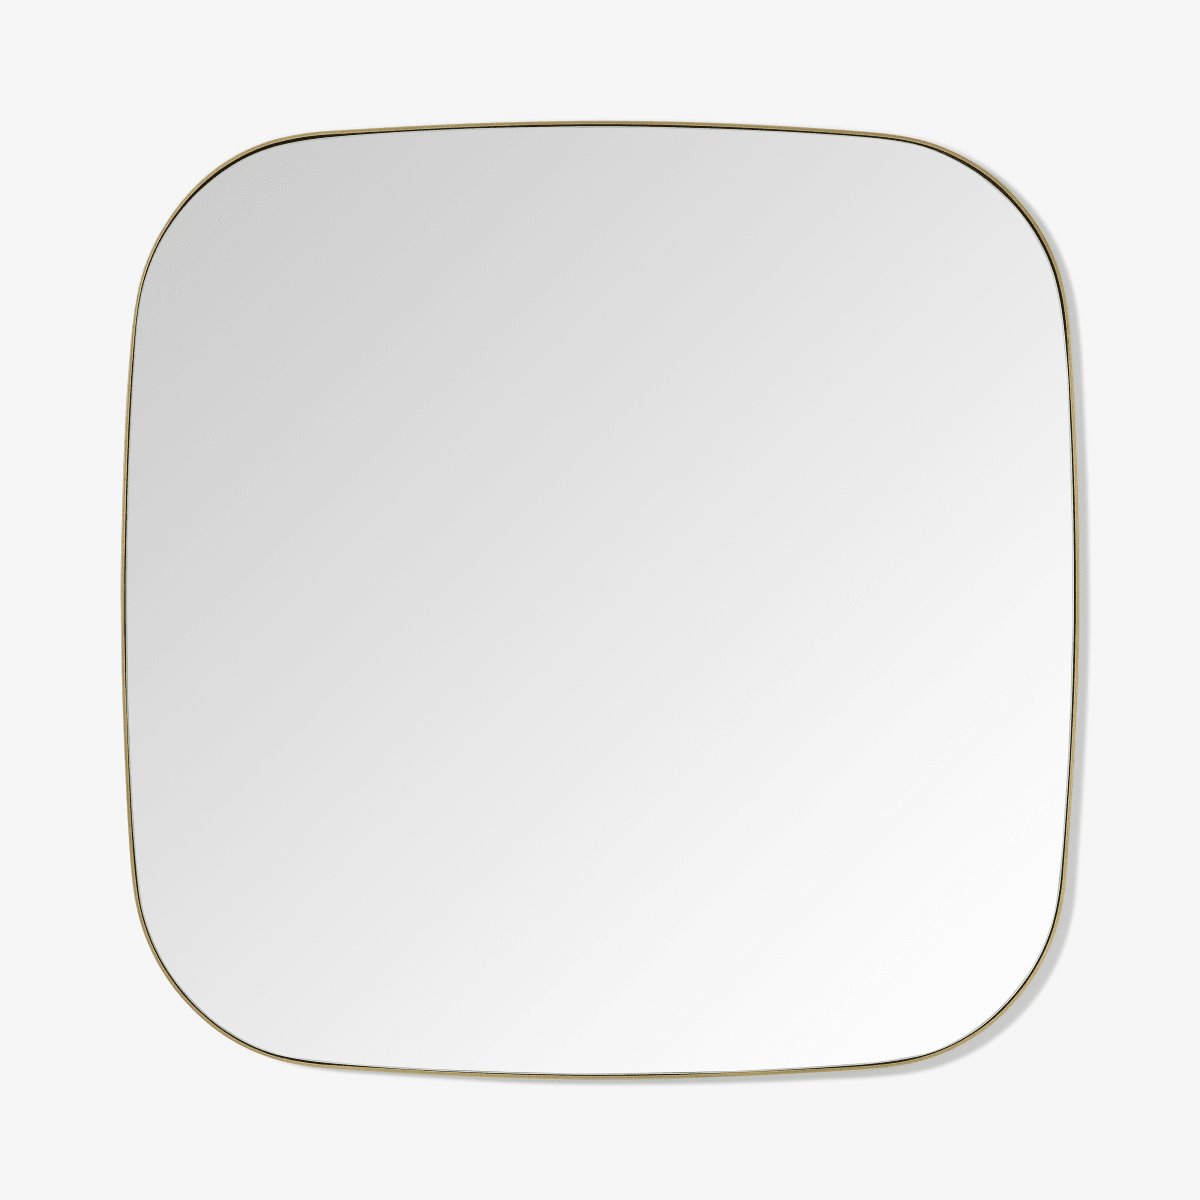 Emmerson Soft Square Mirror, 70 x 70cm, Brushed Brass